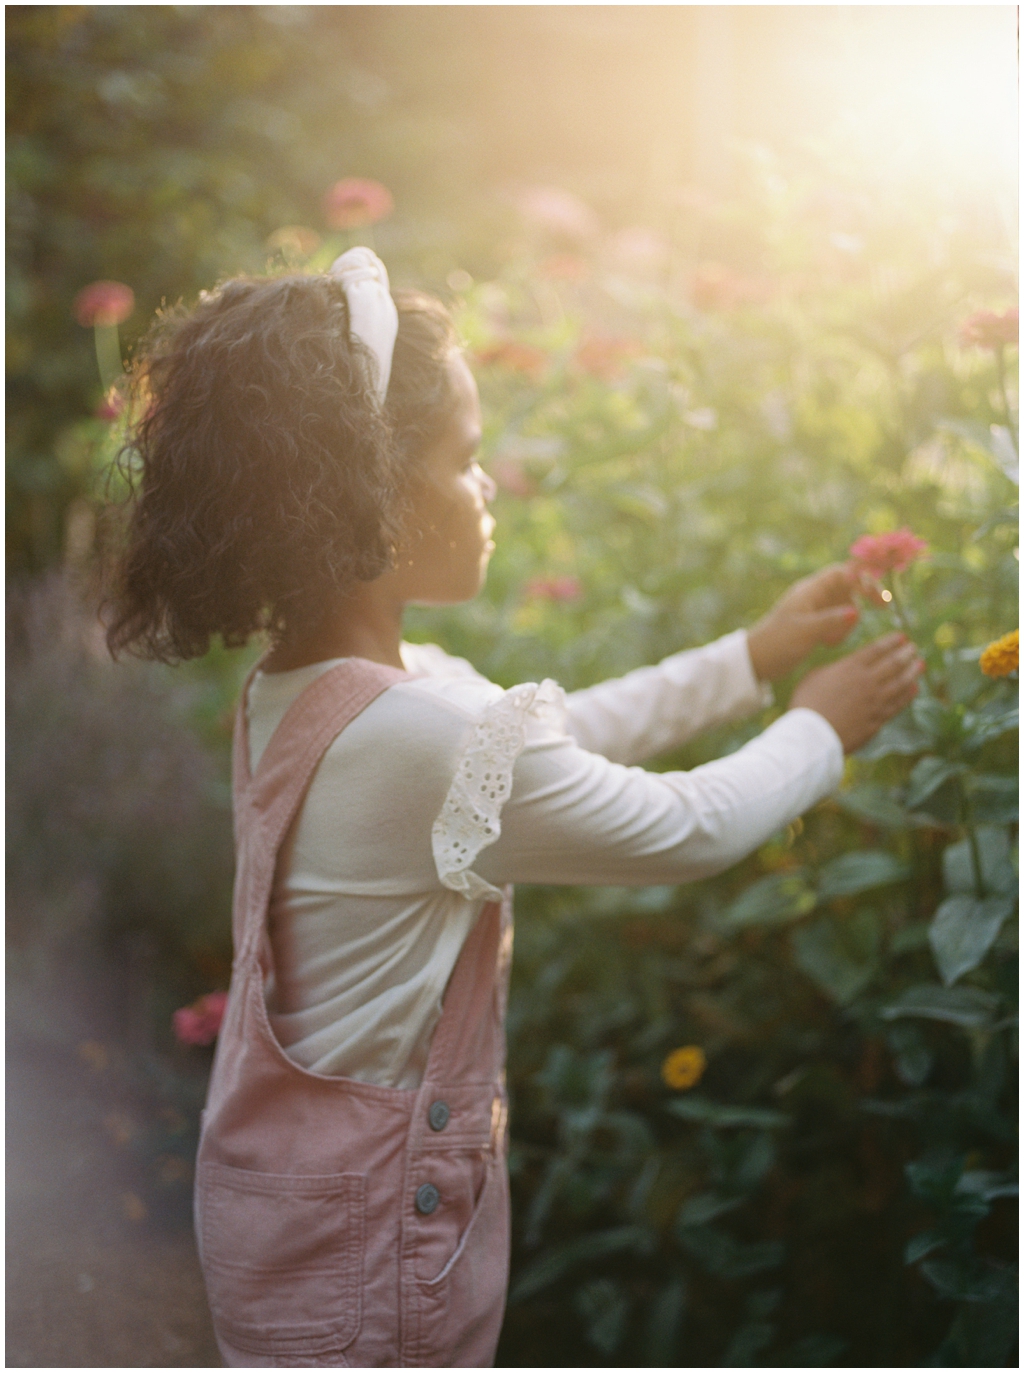 Image by Holly Michon Photography, glowing natural light hitting the flowers and little girl at the Knoxville Botanical Gardens.